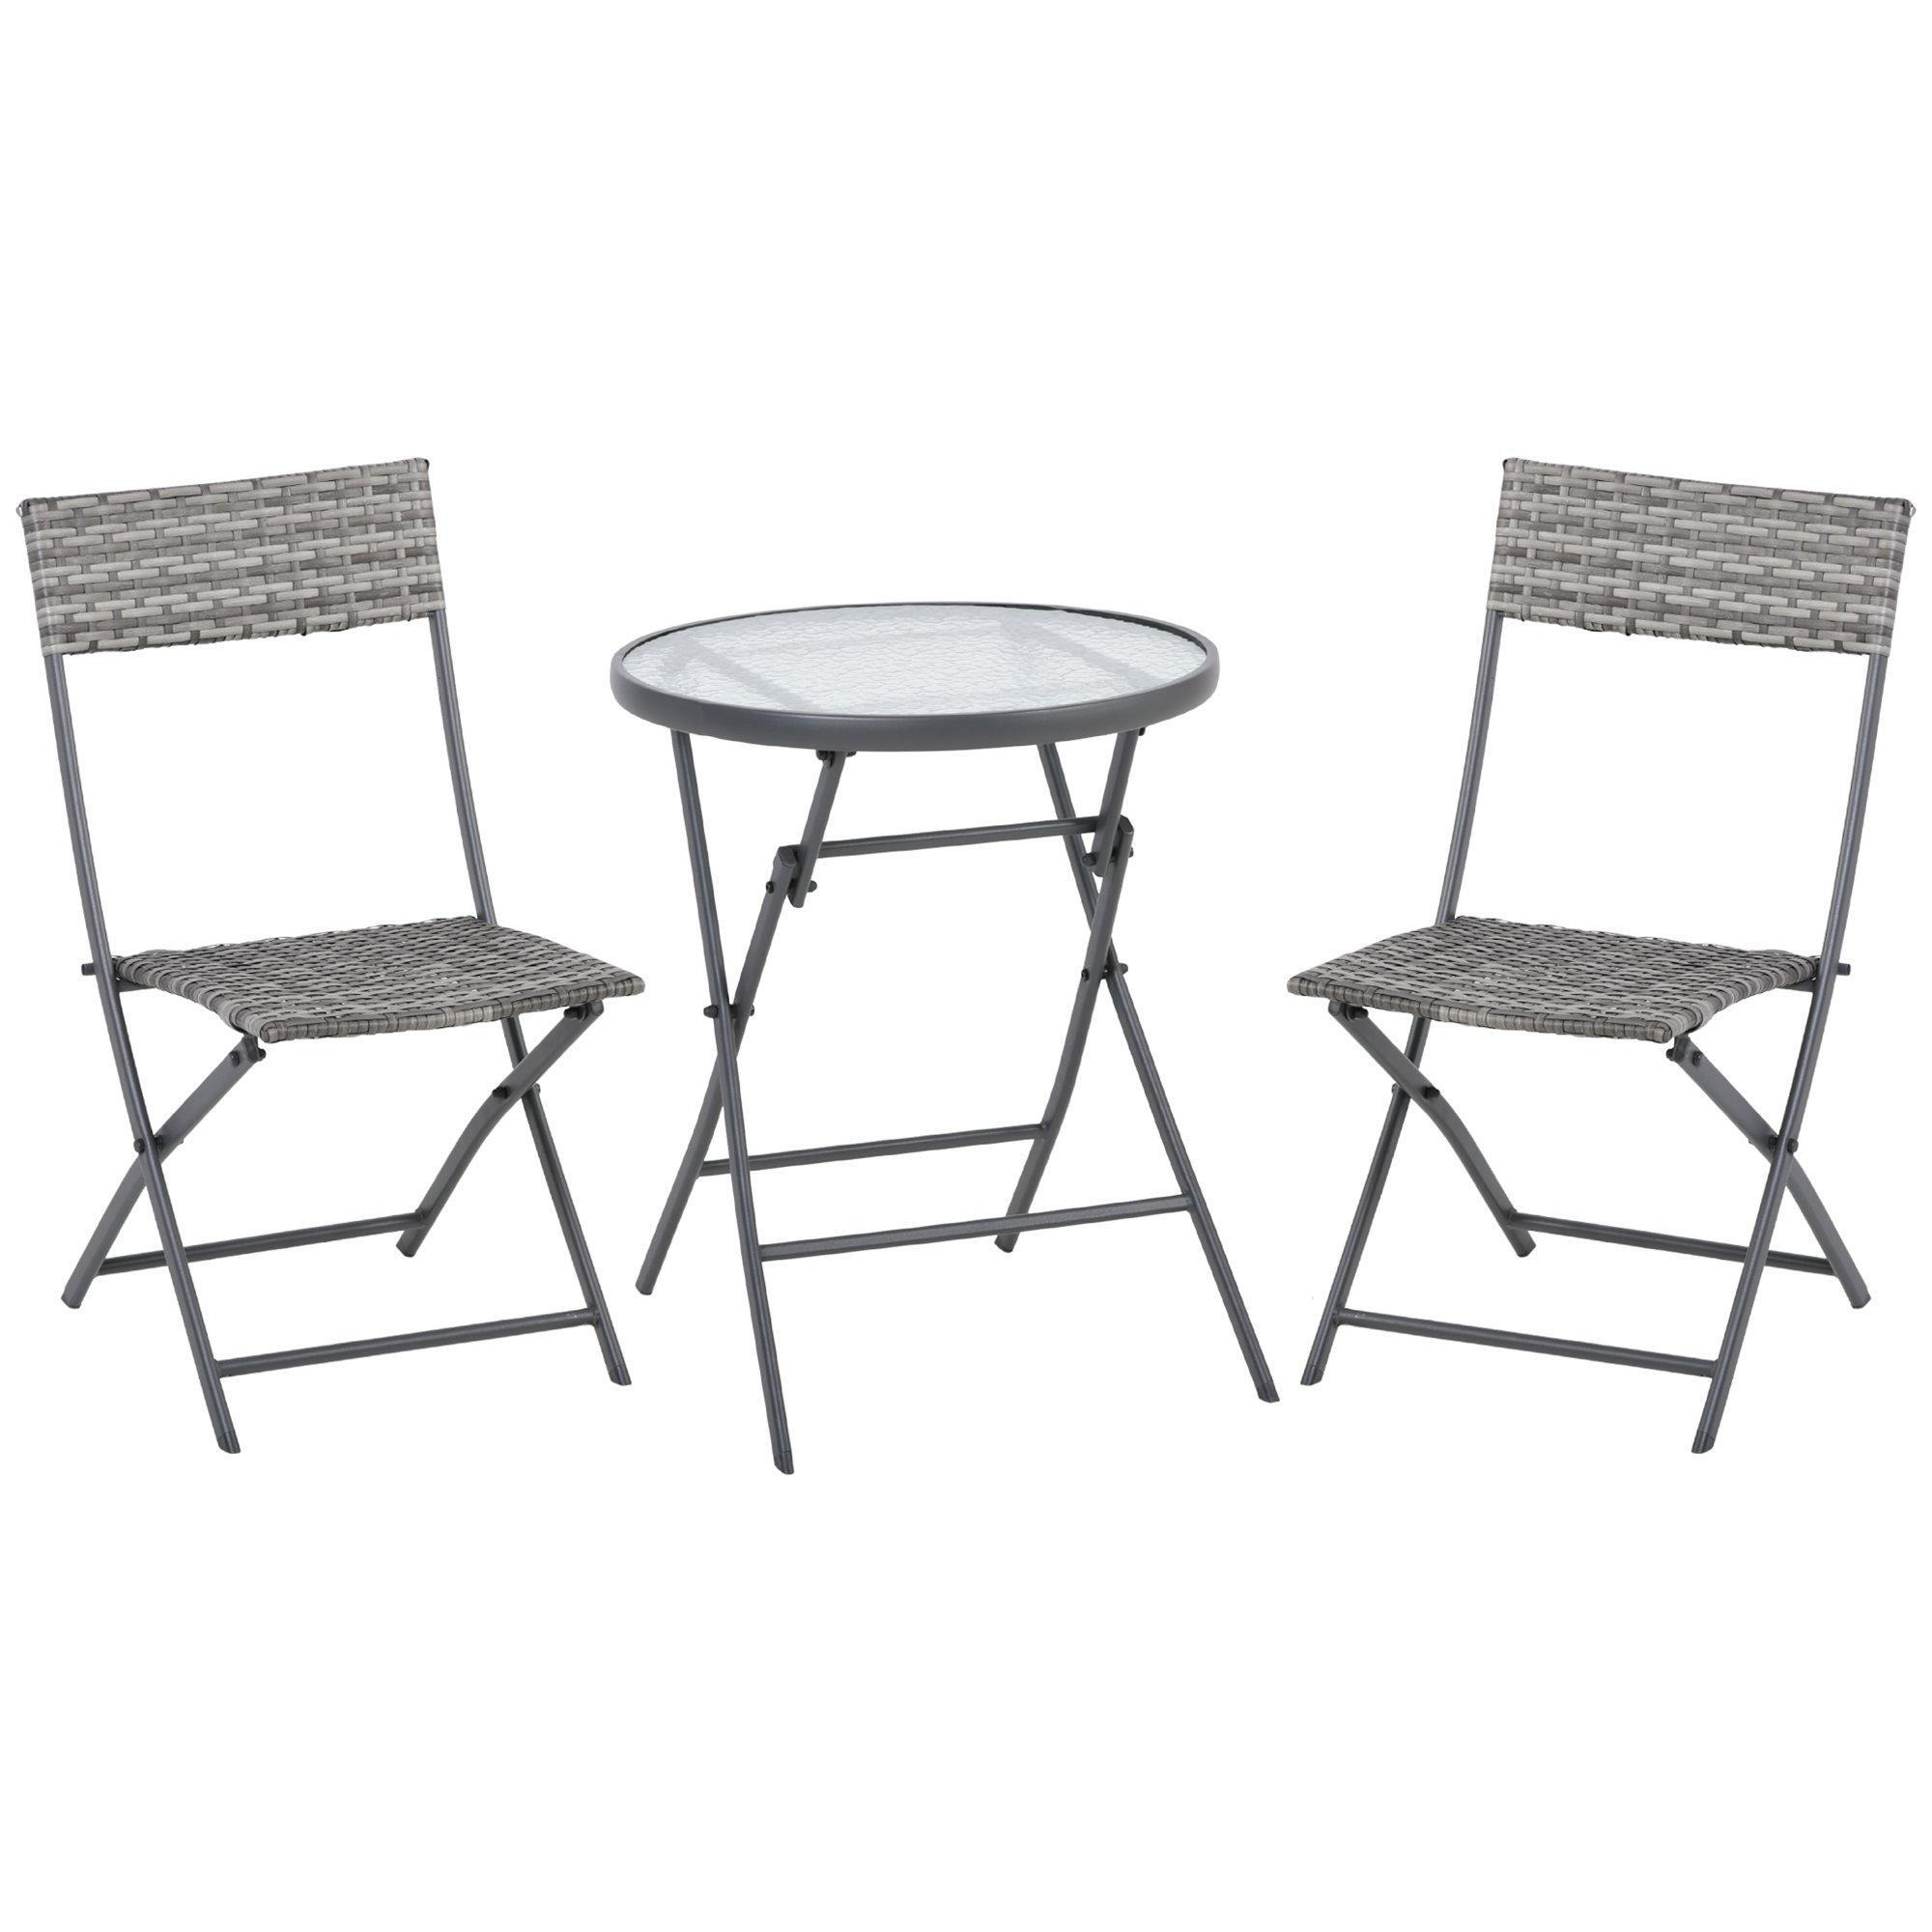 3 PCs Patio Wicker Bistro Set Foldable Table and Chair Set for Outdoor Yard - image 1